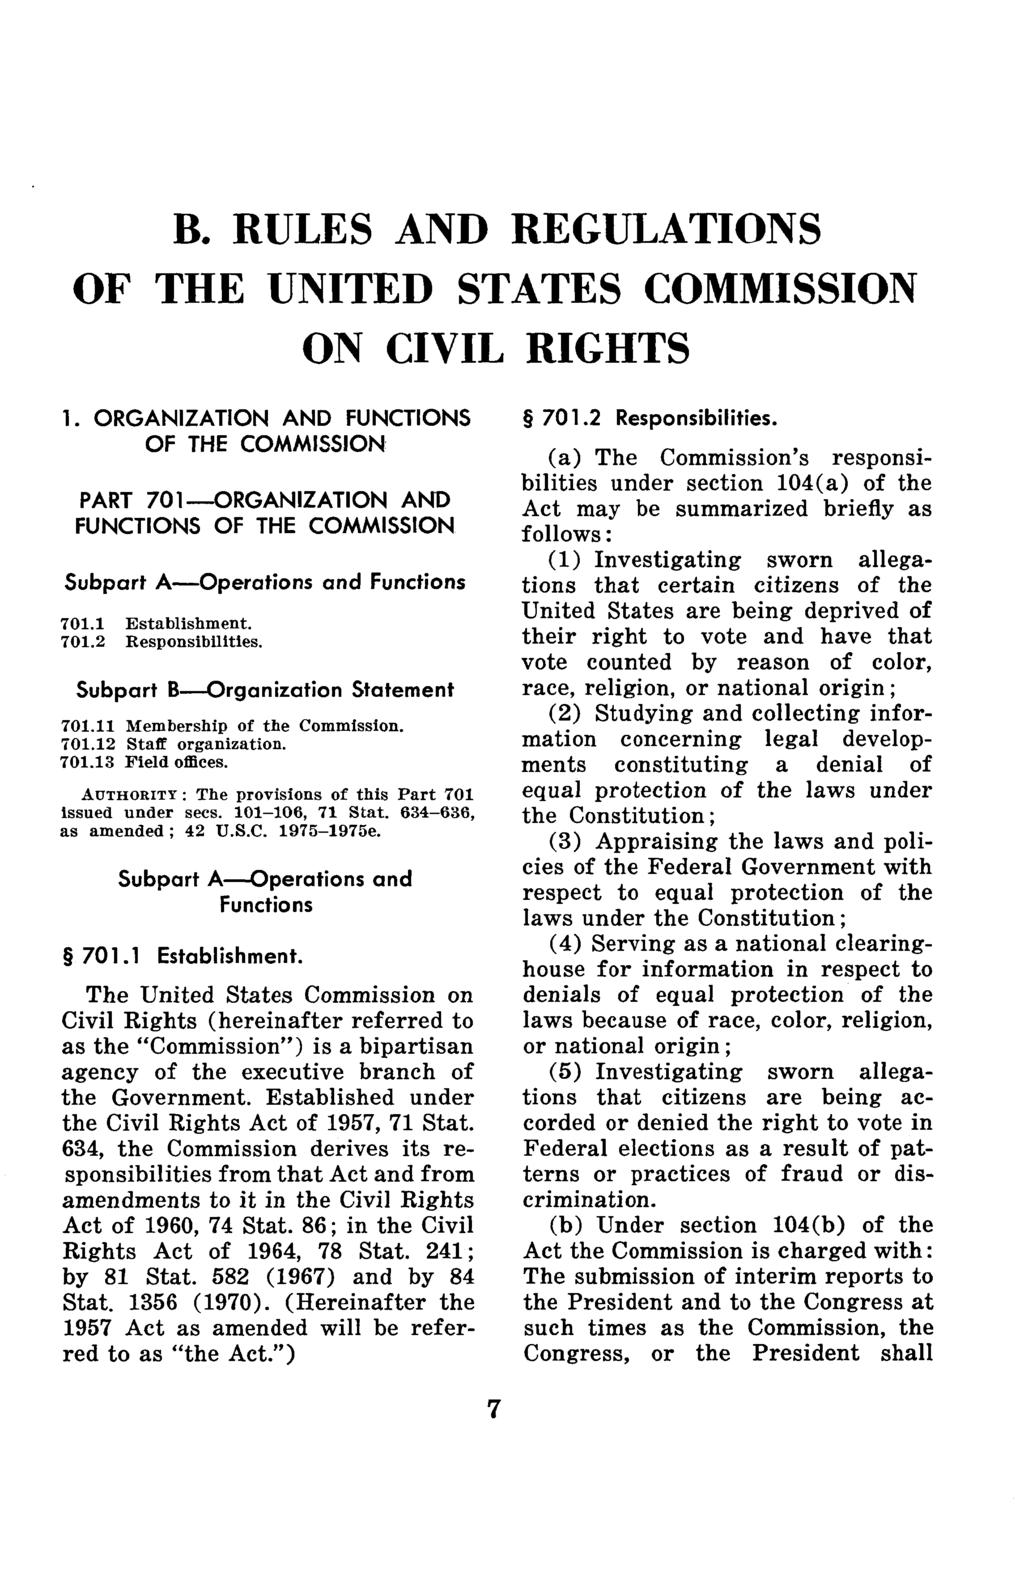 B. RULES AND REGULATIONS OF THE UNITED STATES COMMISSION ON CIVIL RIGHTS 1.